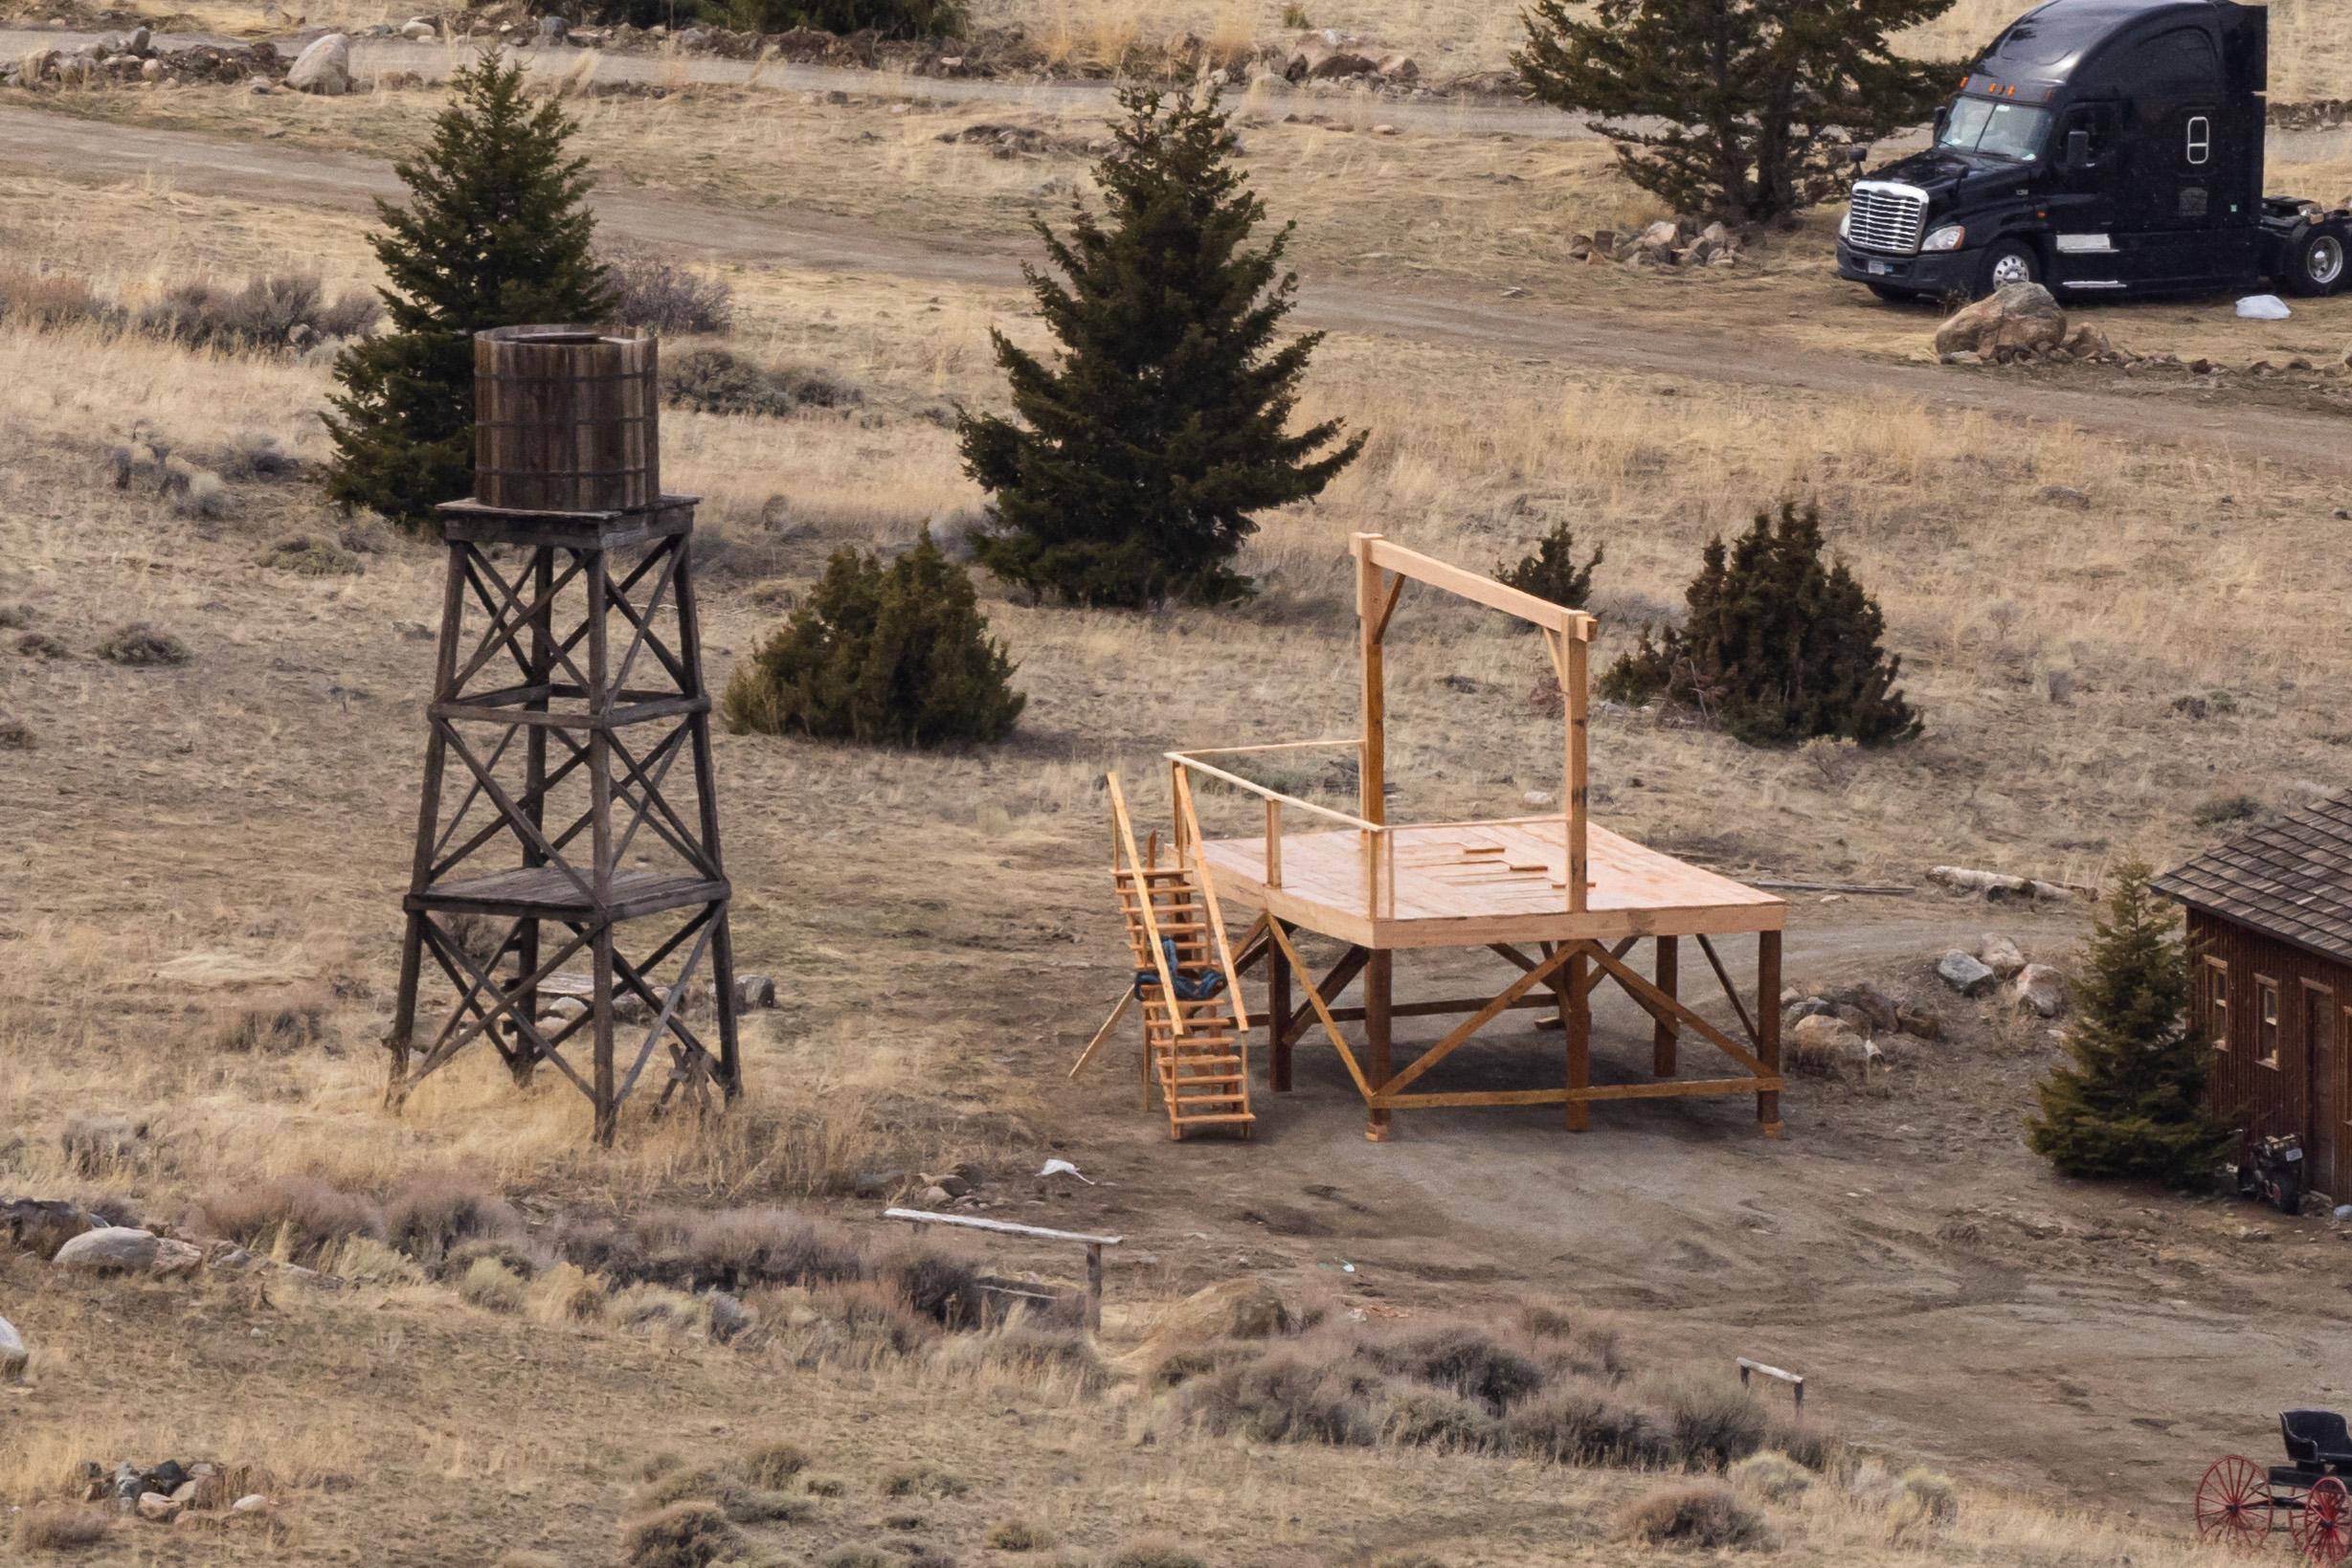 The set of Alec Baldwin's 'Rust' movie as filming resumes in Montana.